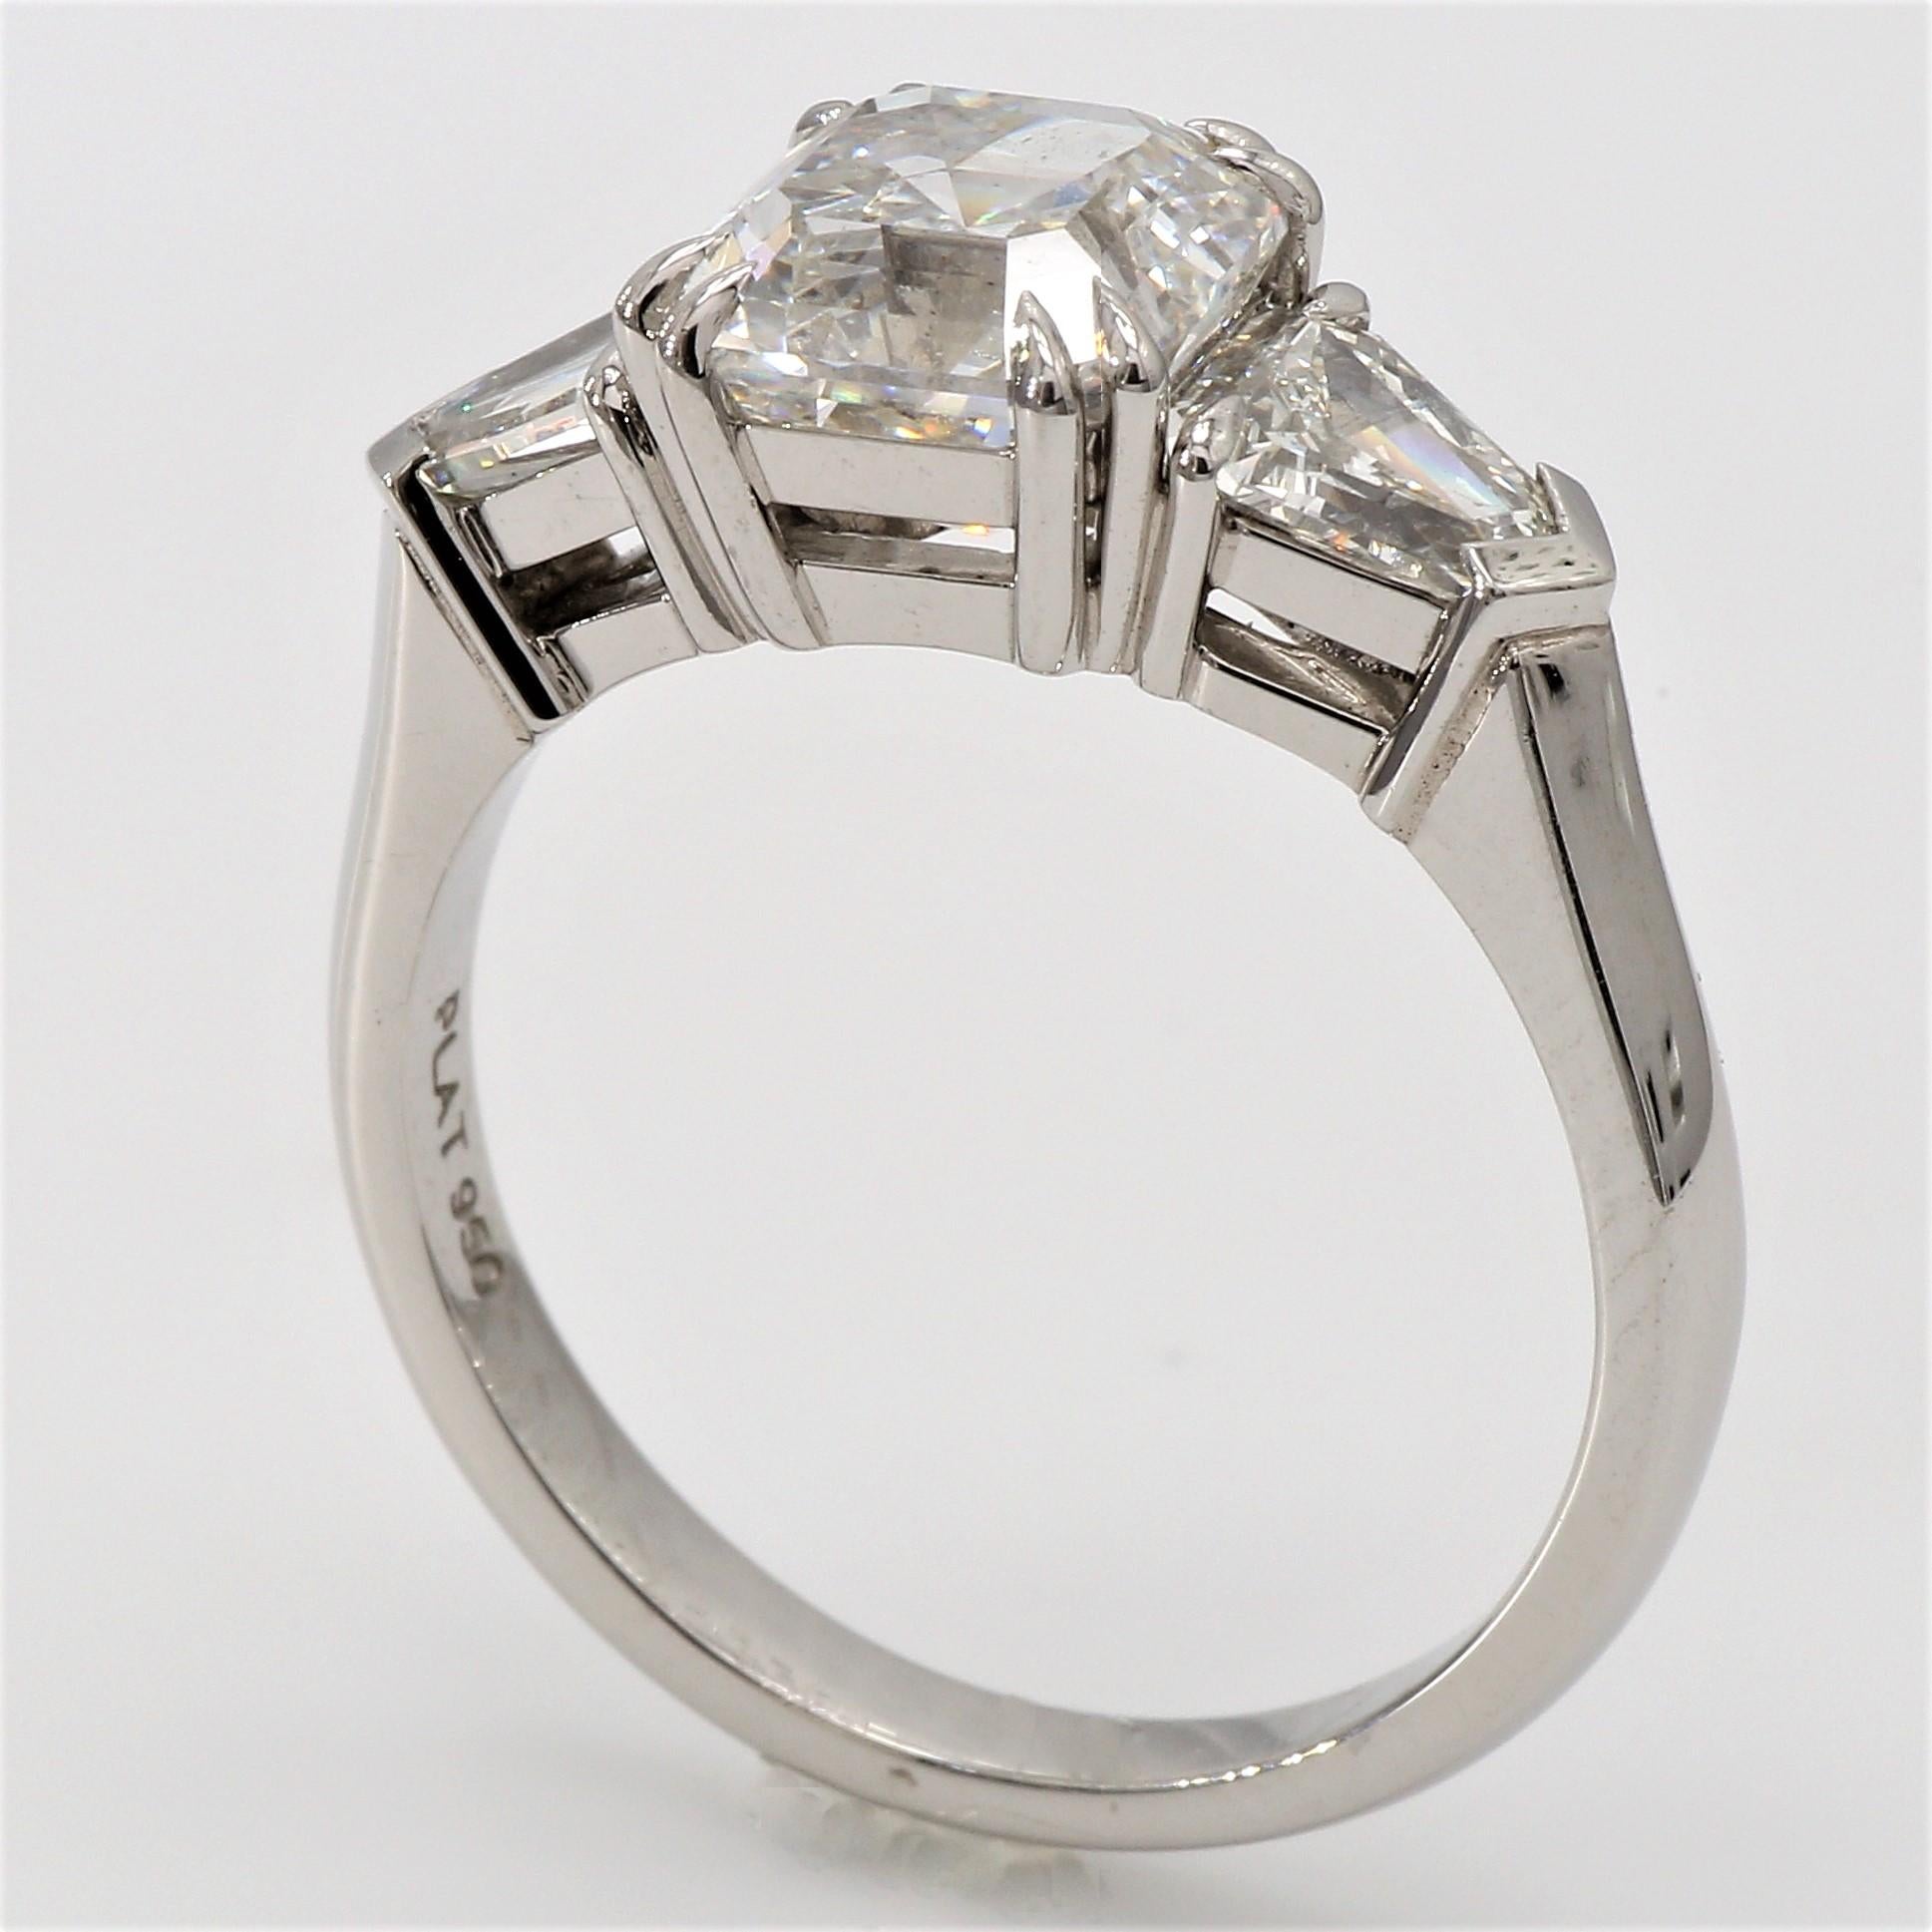 Handcrafted Platinum Engagement Ring,
Asscher Cut White Diamond 2.59ct  H color, SI2 clarity flanked by 2 Trapezoid Shape White Diamonds totaling 0.75ct G-H Color, VVS2 Clarity.
Double 4 Claw Designer Ring. EGL Certified South African Diamond
Ring